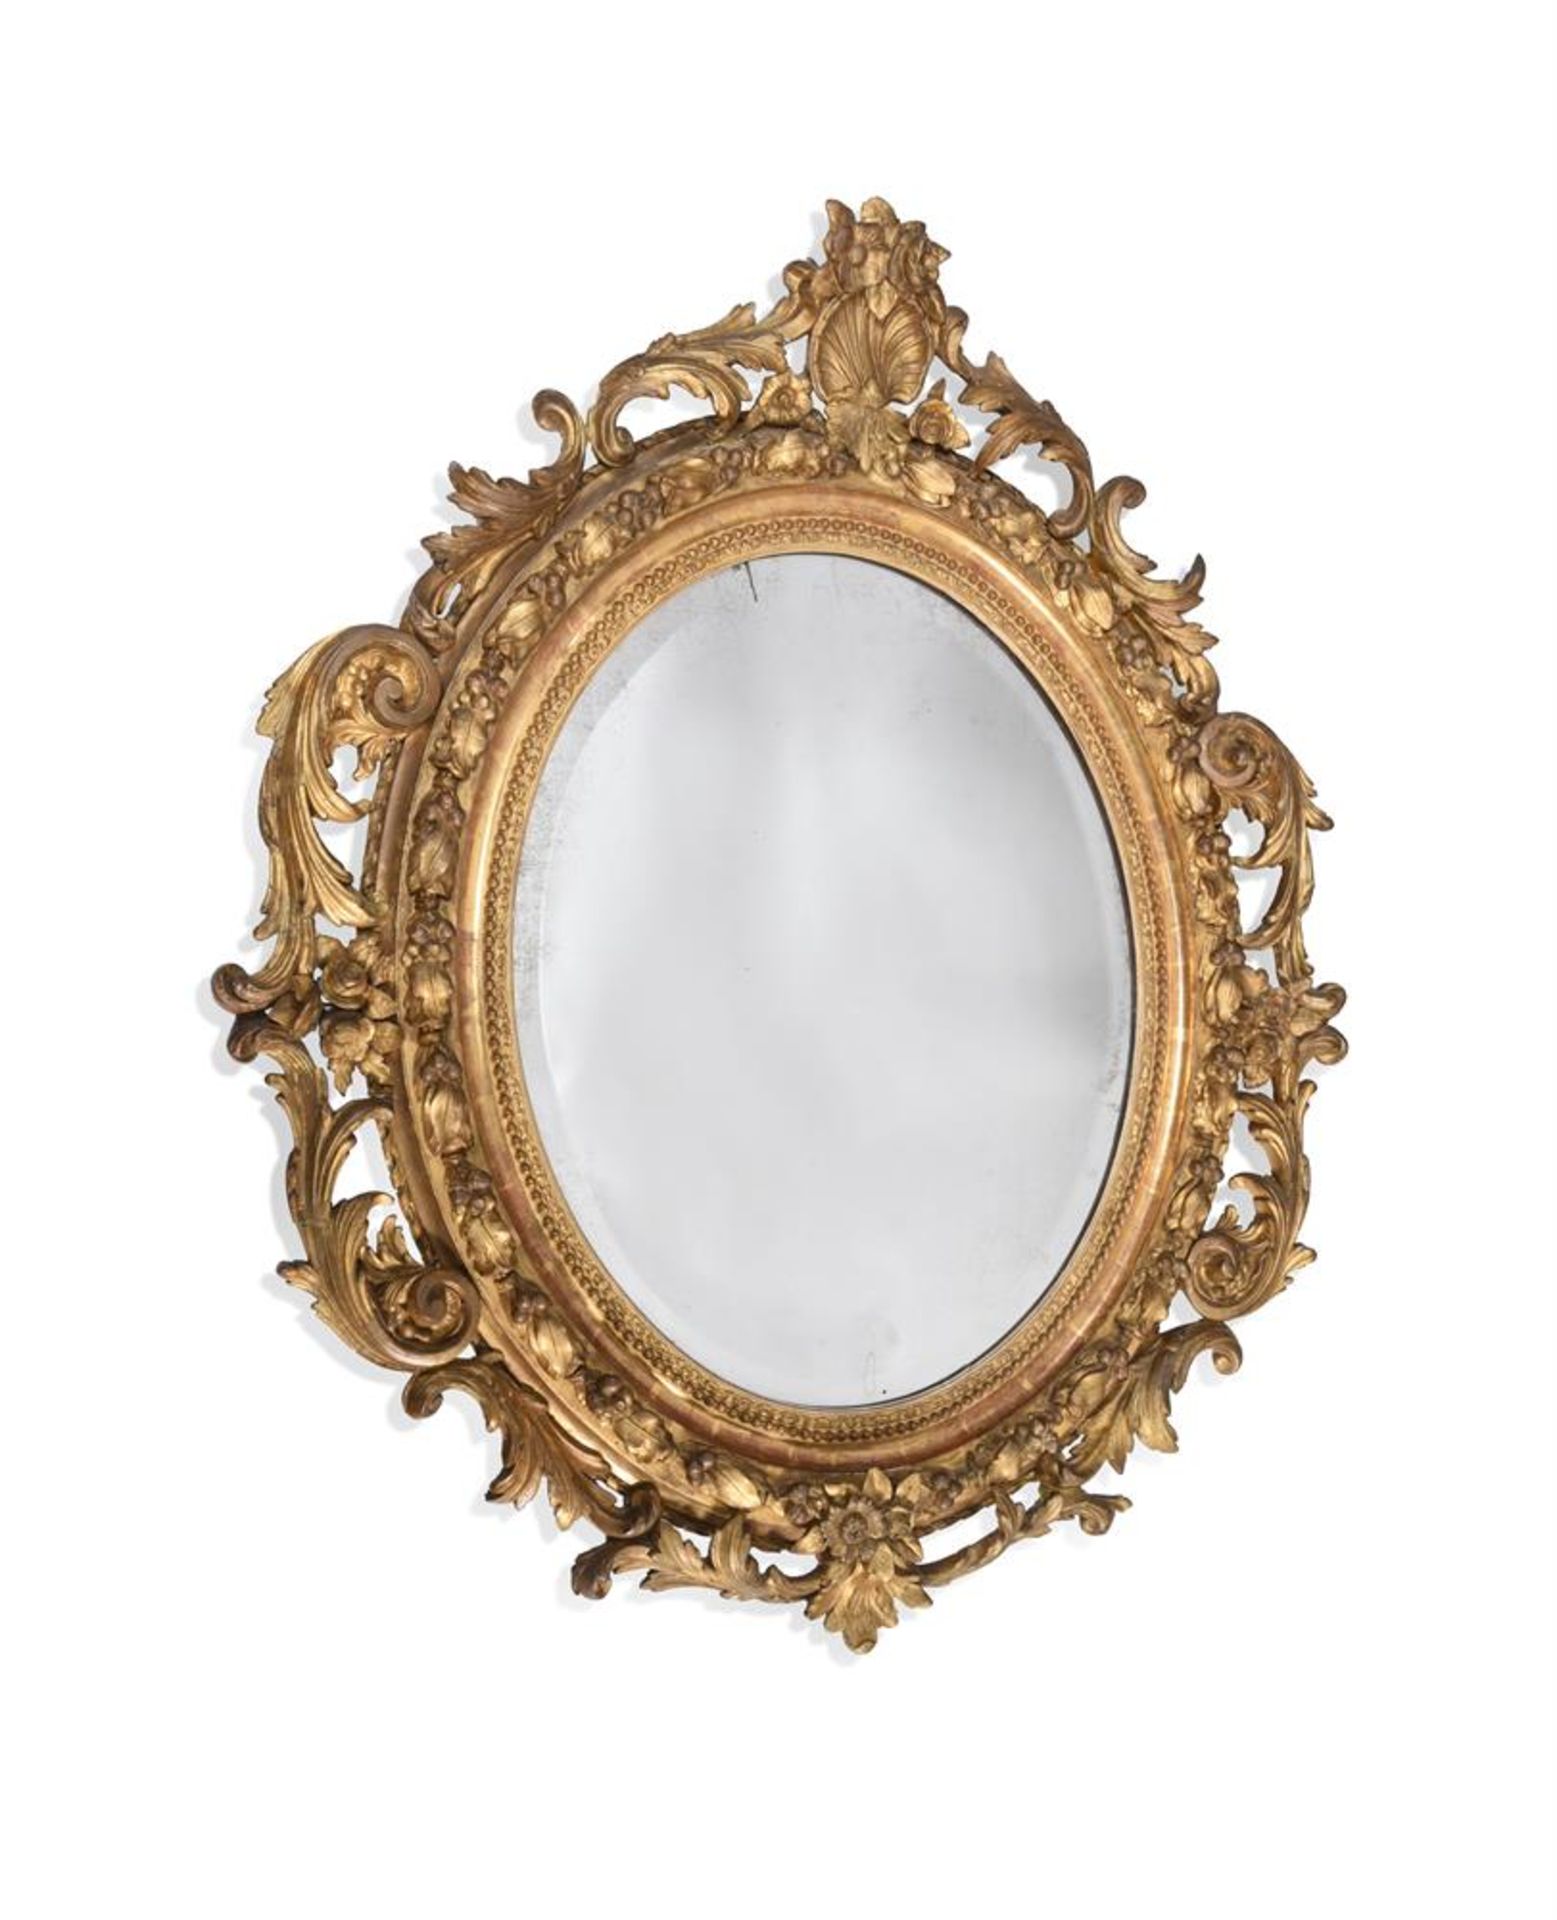 A GILTWOOD AND GESSO MIRROR, POSSIBLY FRENCH, 19TH CENTURY